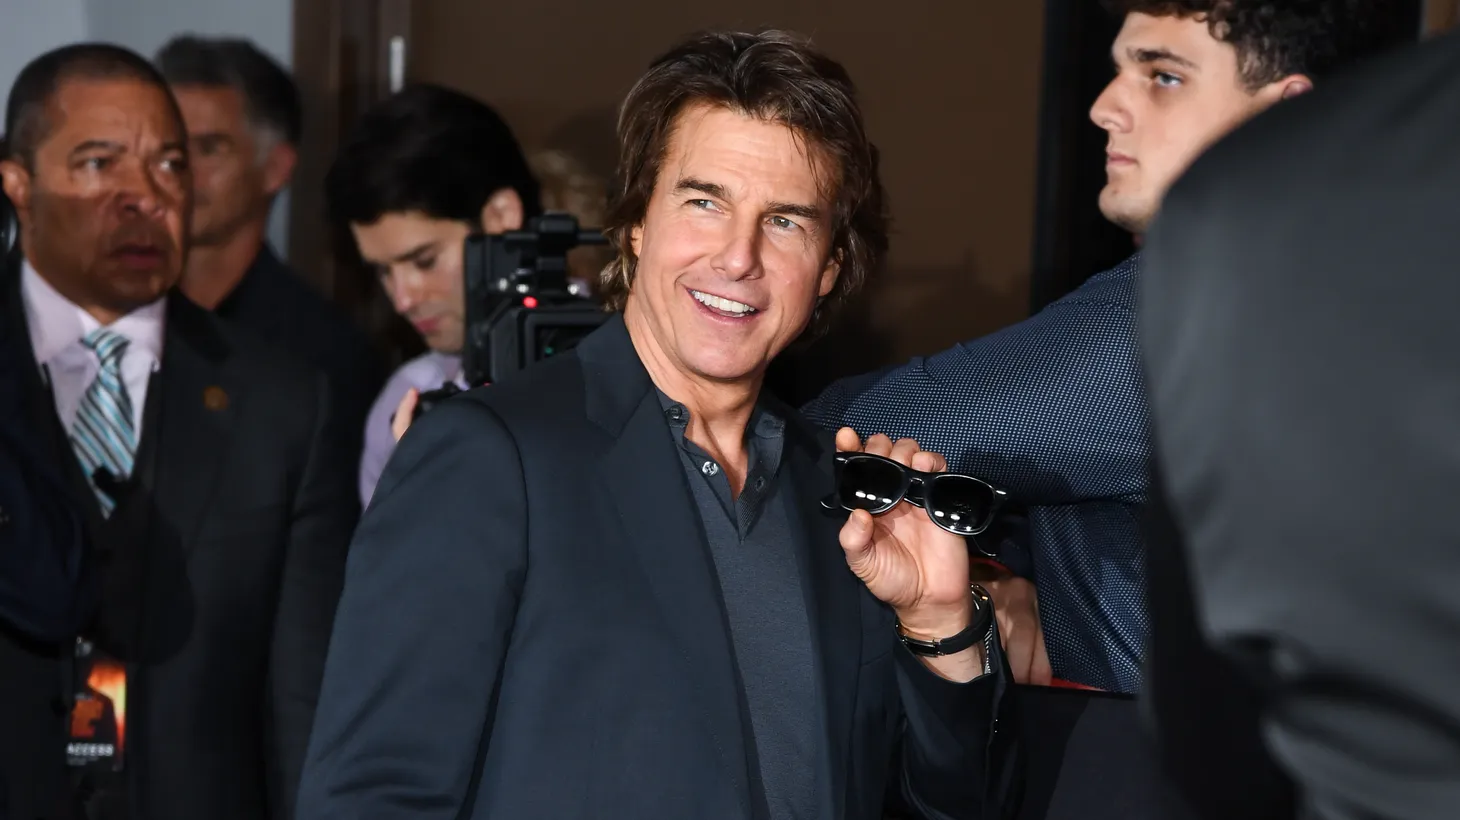 Tom Cruise walking on the red carpet as Paramount Pictures and Skydance host the US premiere of Mission: Impossible - Dead Reckoning Part One at the Rose Theater, at Jazz at Lincoln Center’s Frederick P. Rose Hall in New York, NY, July 10, 2023.